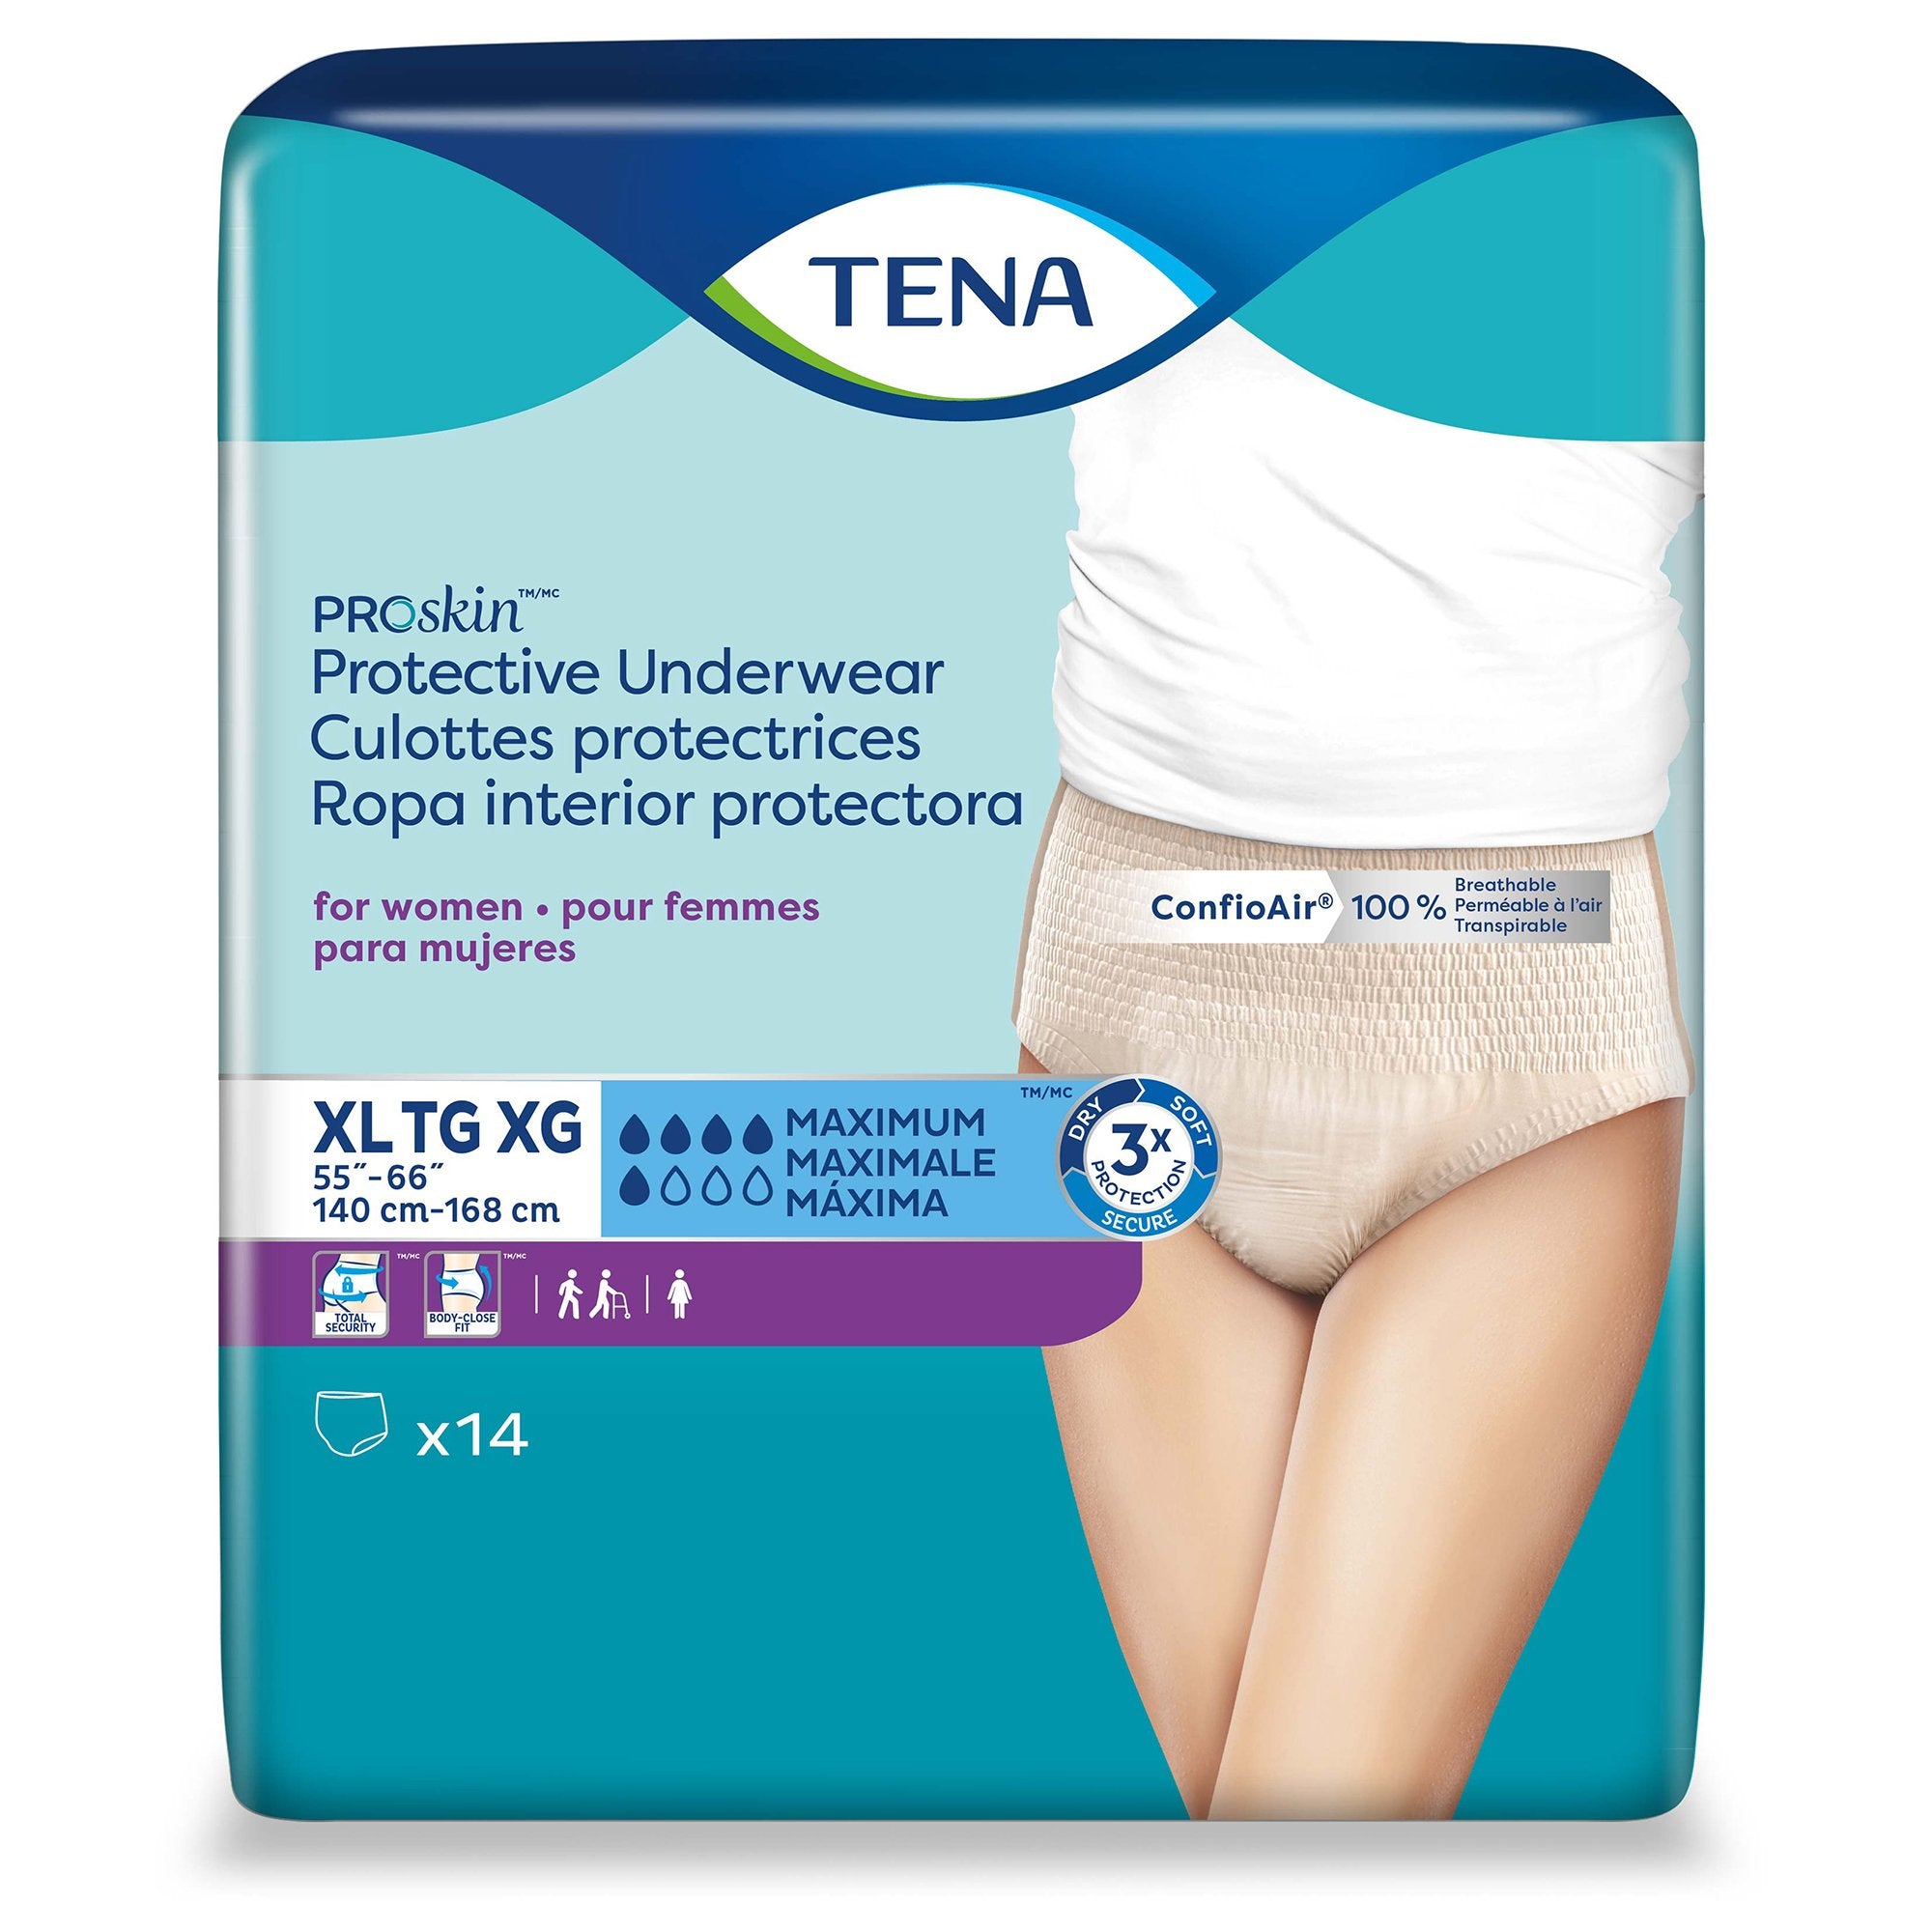 Female Adult Absorbent Underwear TENA ProSkin Protective Pull On with Tear Away Seams X-Large Disposable Moderate Absorbency